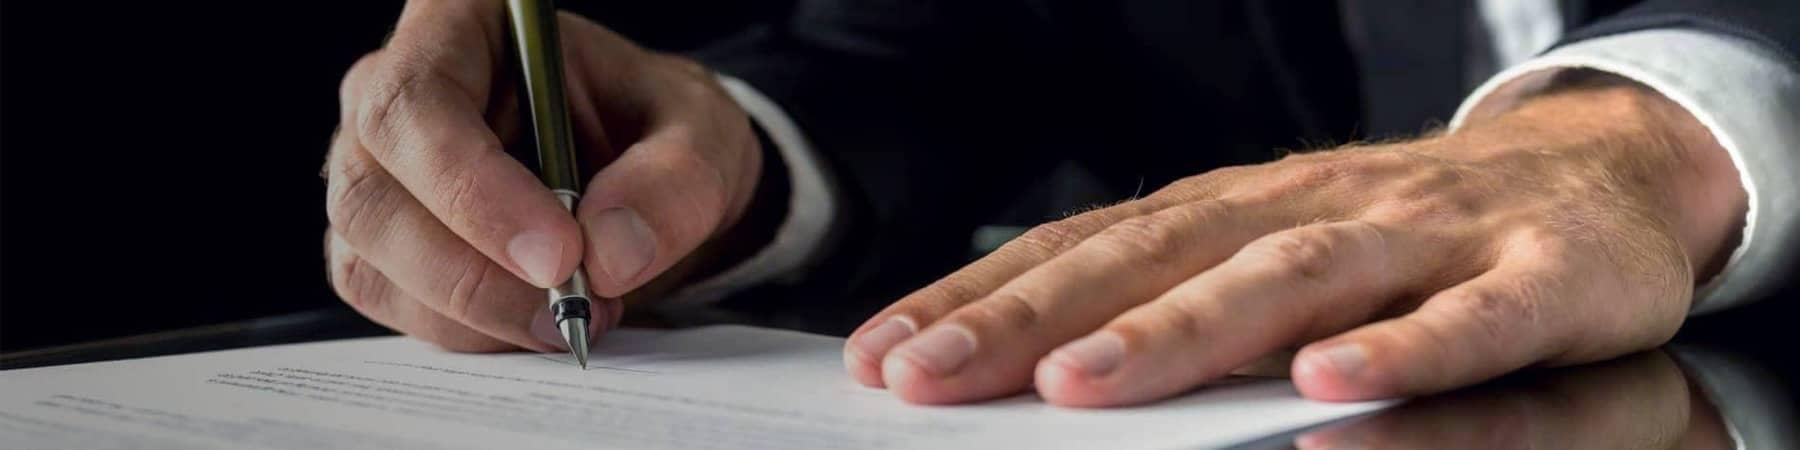 Hands of Man in Suit Signing Documents